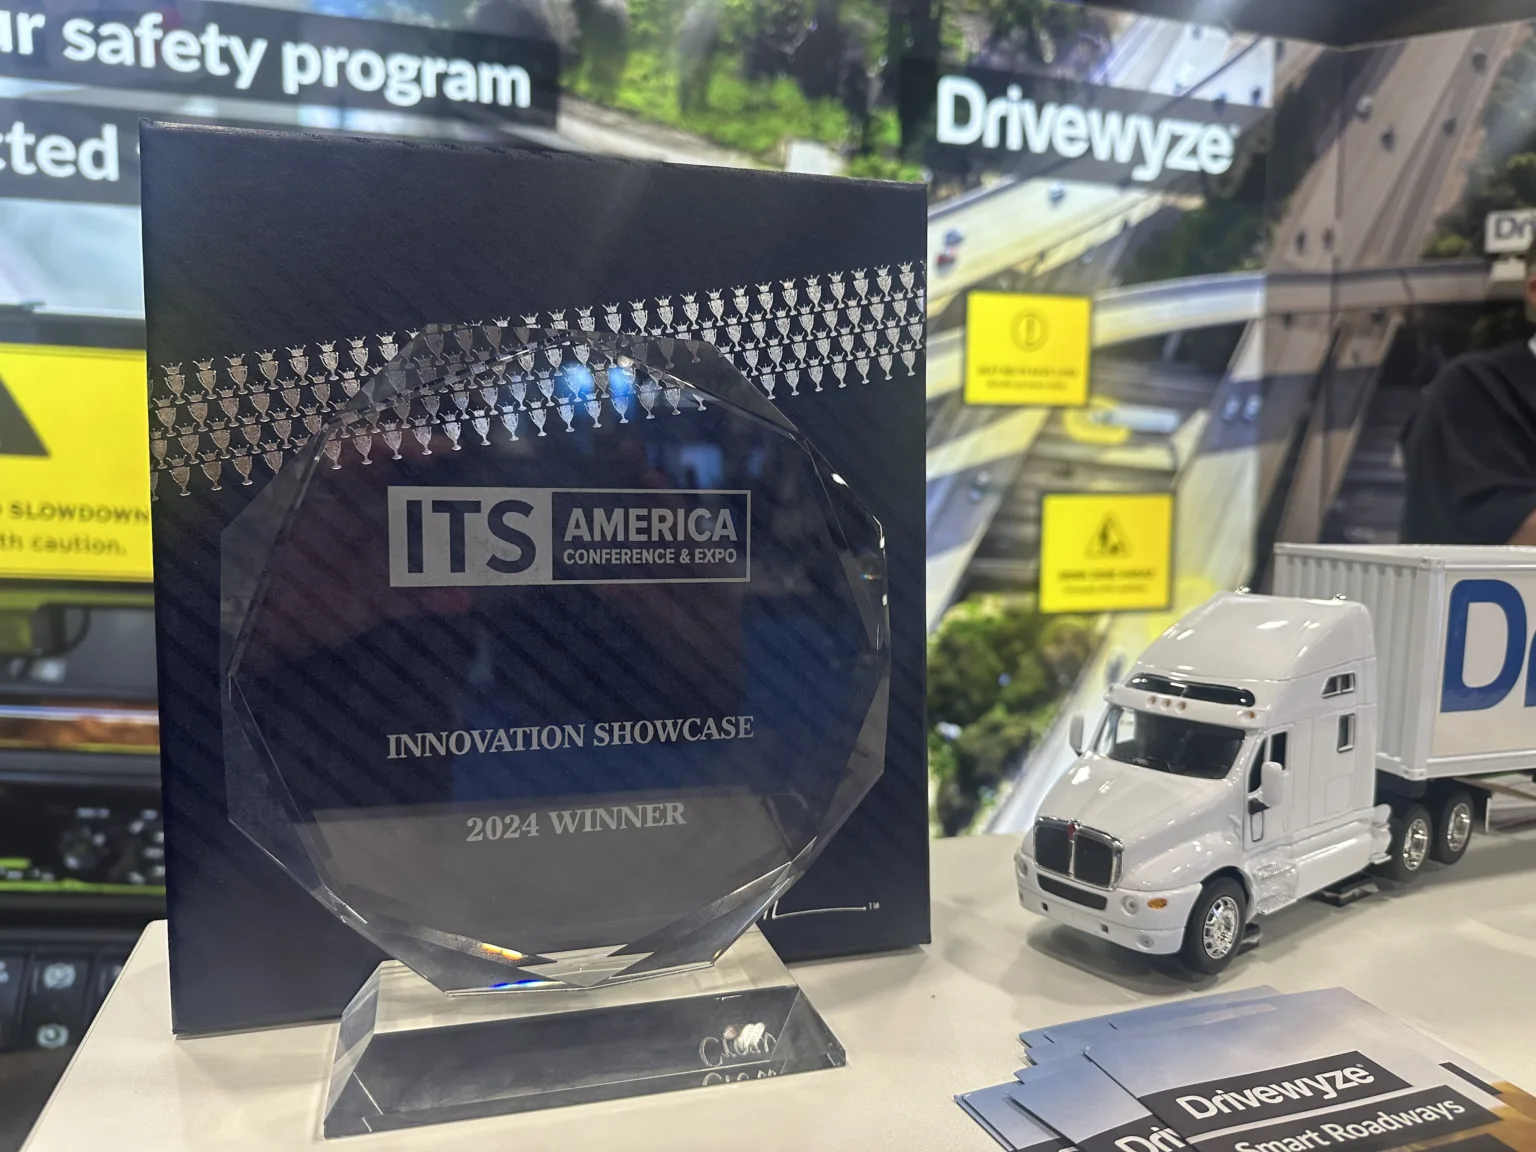 Drivewyze Receives Innovation Showcase Award from ITS America